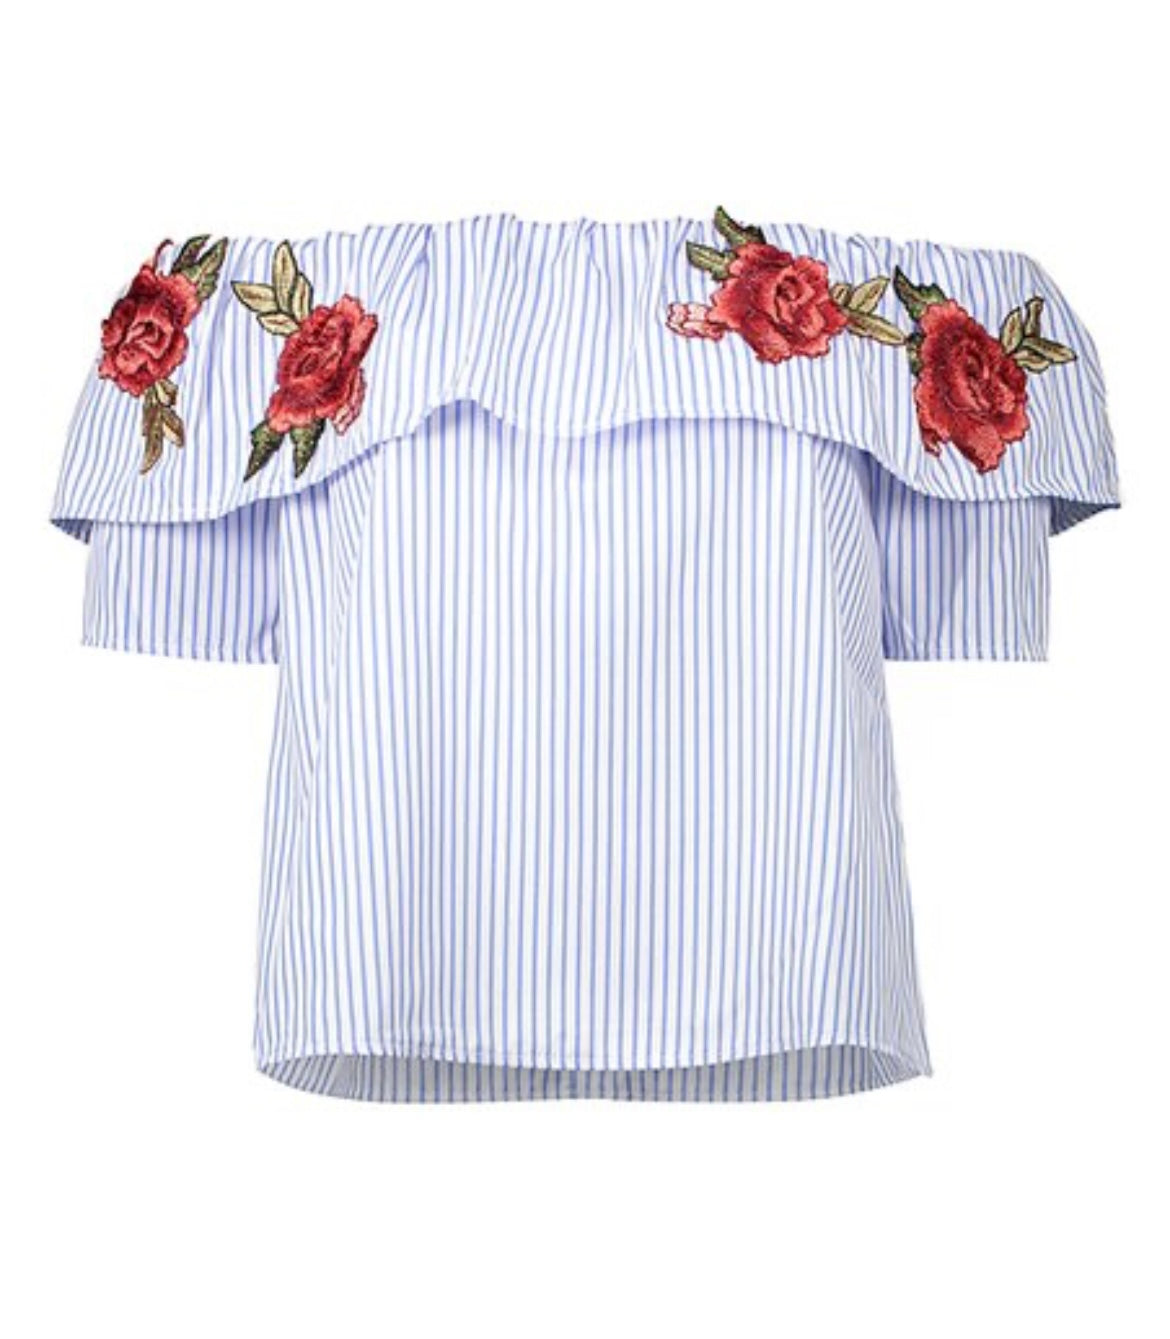 Rosé embroidery off shoulder grill top